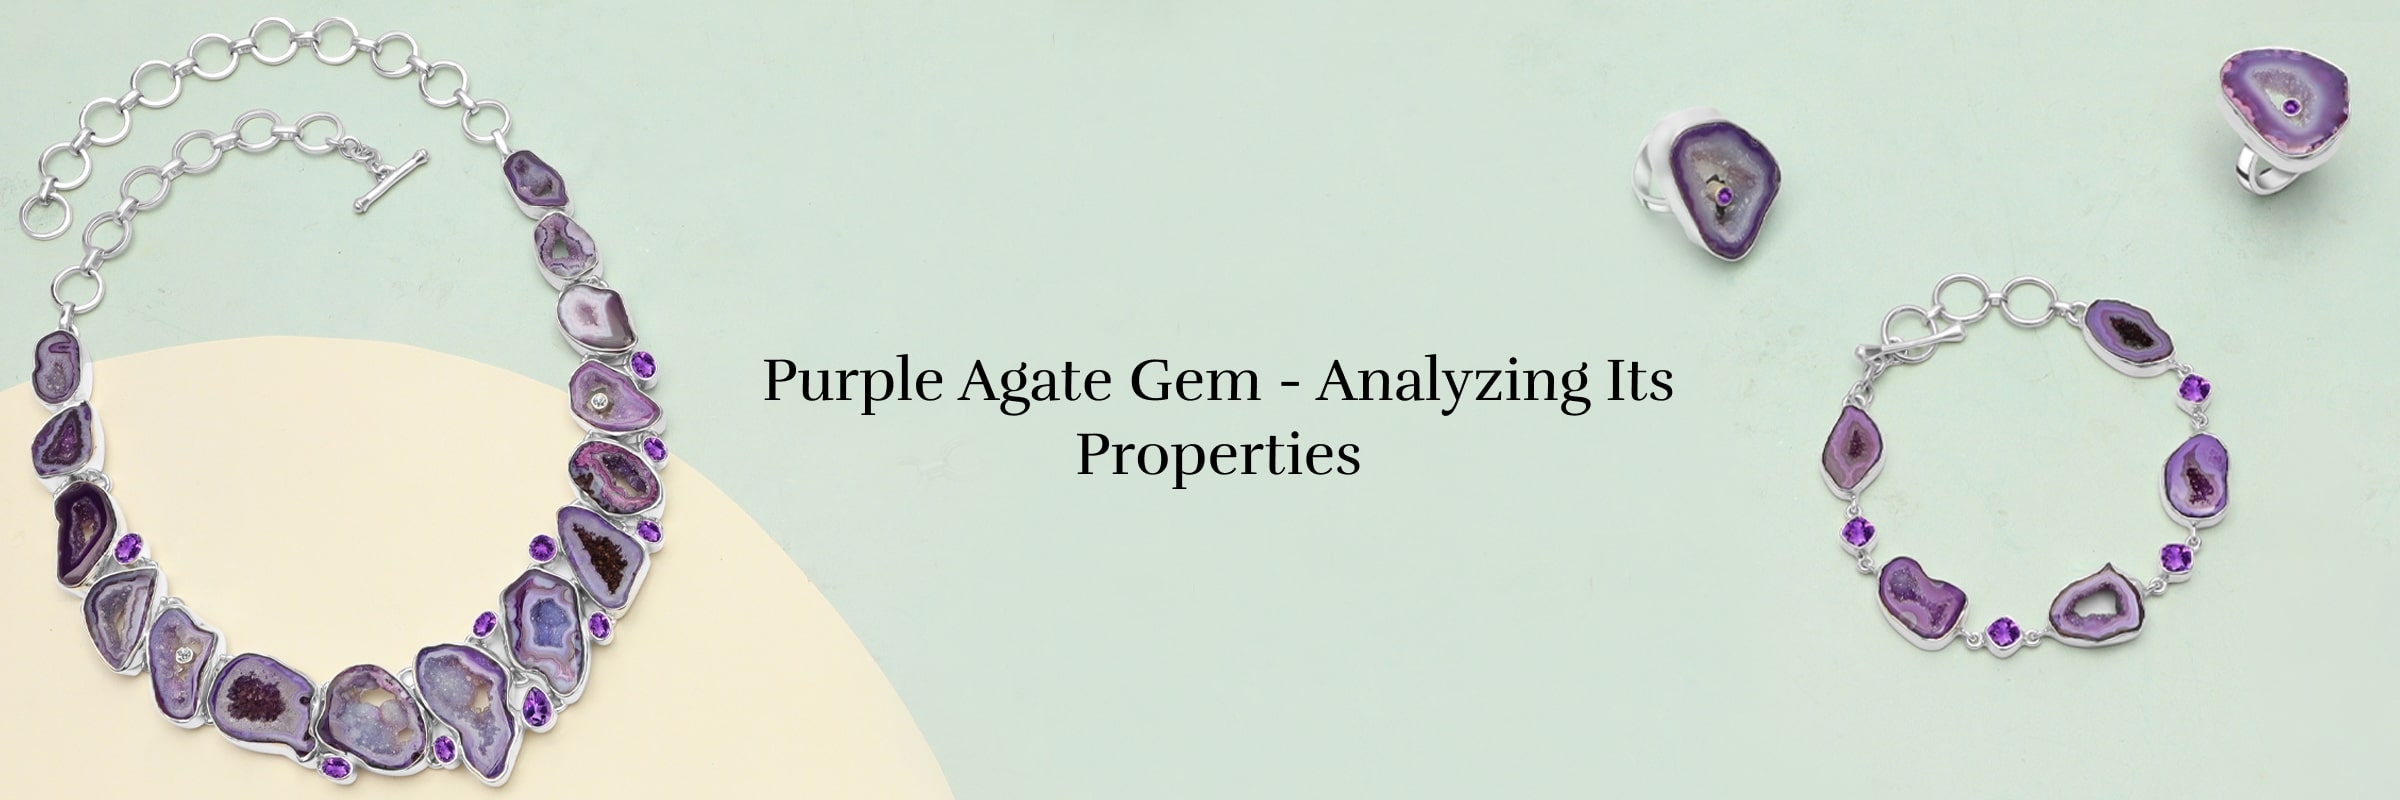 Physical Properties of Purple Agate Gem